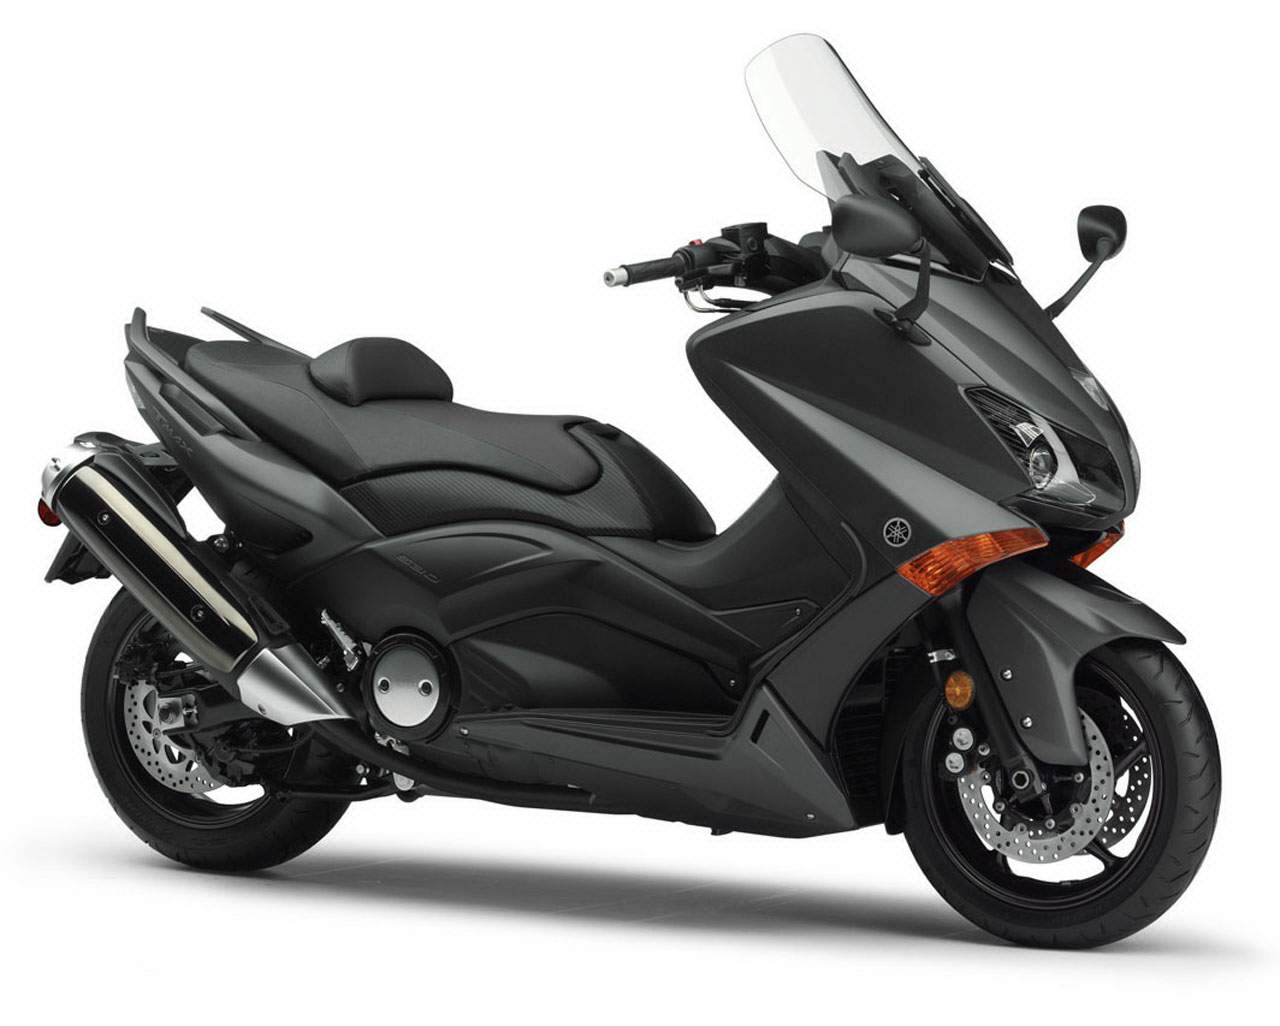 Yamaha [TMAX 530] from 2015 to 2016